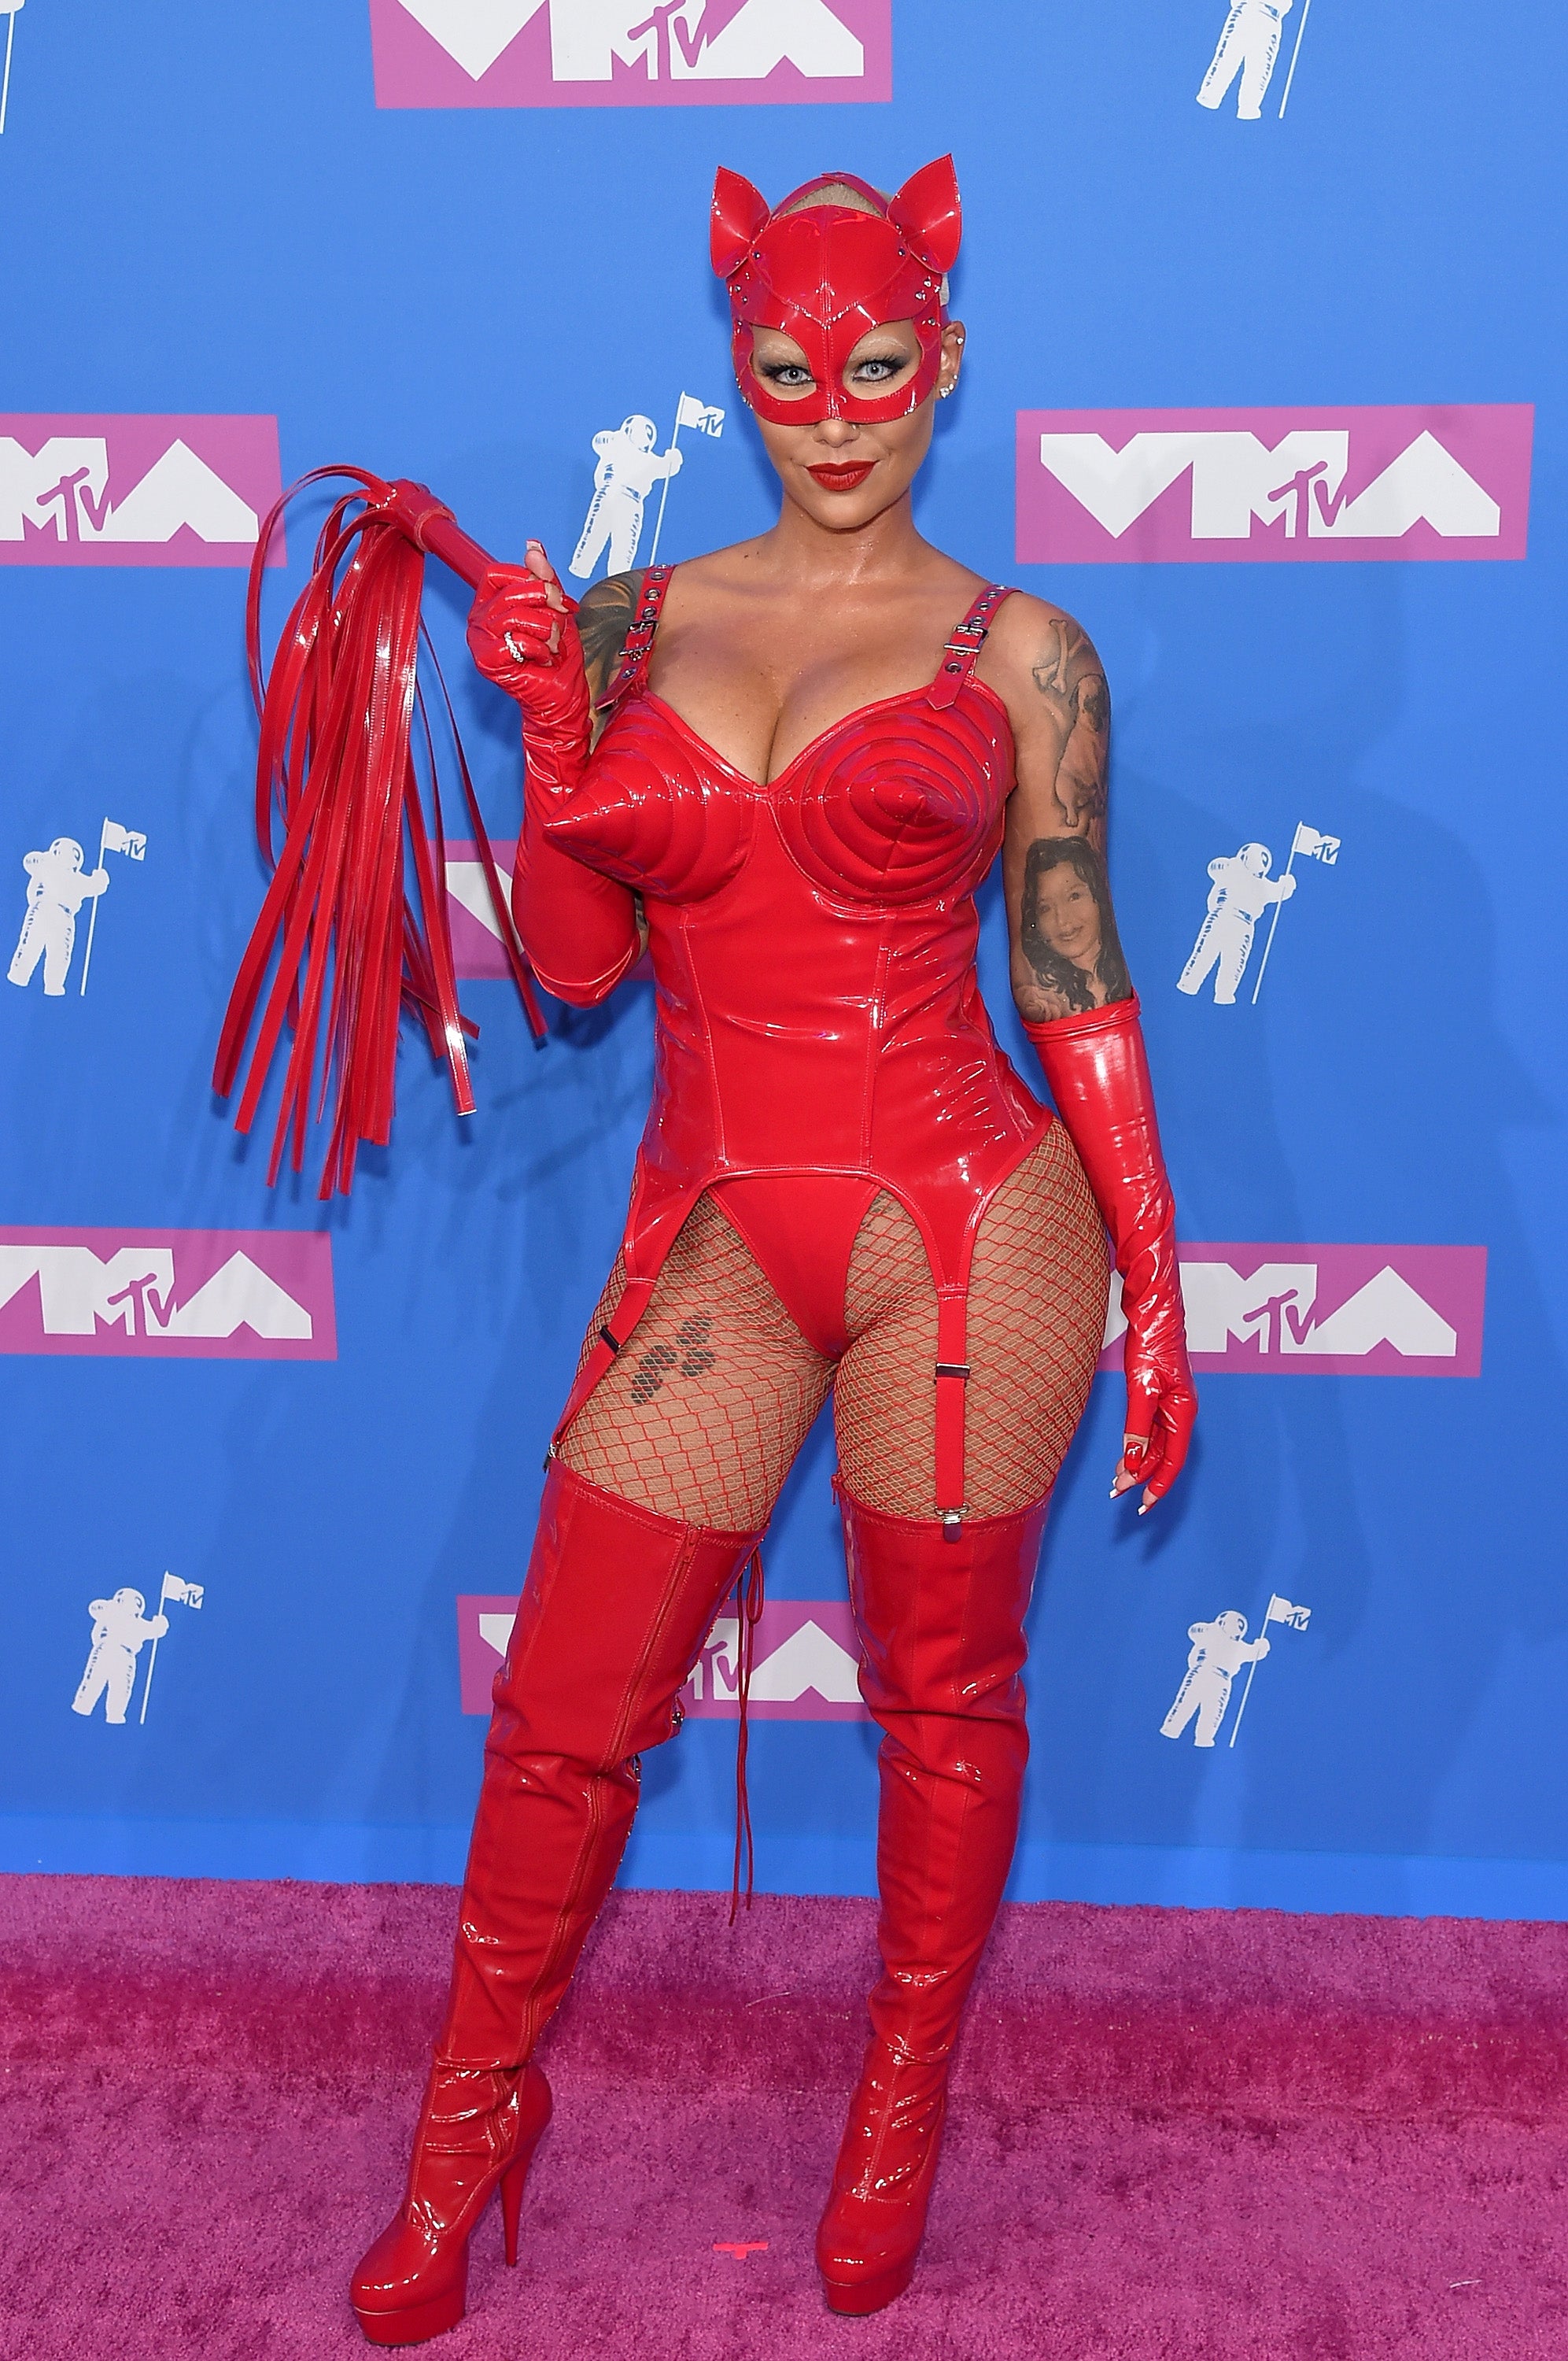 Amber Rose Shares the Inspiration Behind Wild MTV VMAs Red Latex Look (Exclusive) | Entertainment Tonight